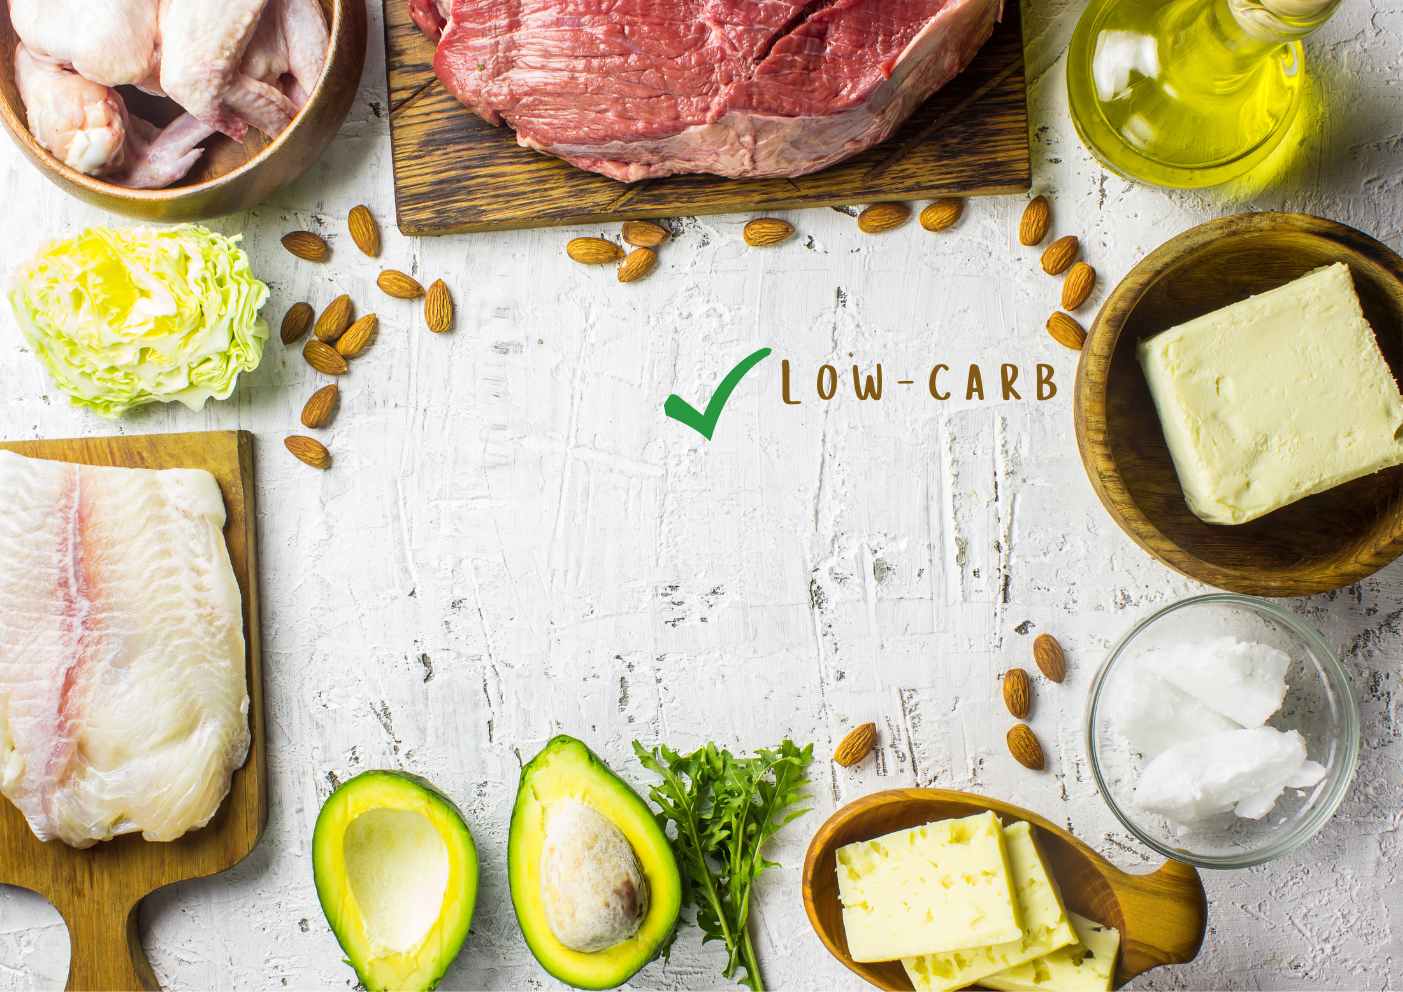 How I Lost 10 Kilos on a Low-Carb Way of Eating in 4 Months, lowcarb food